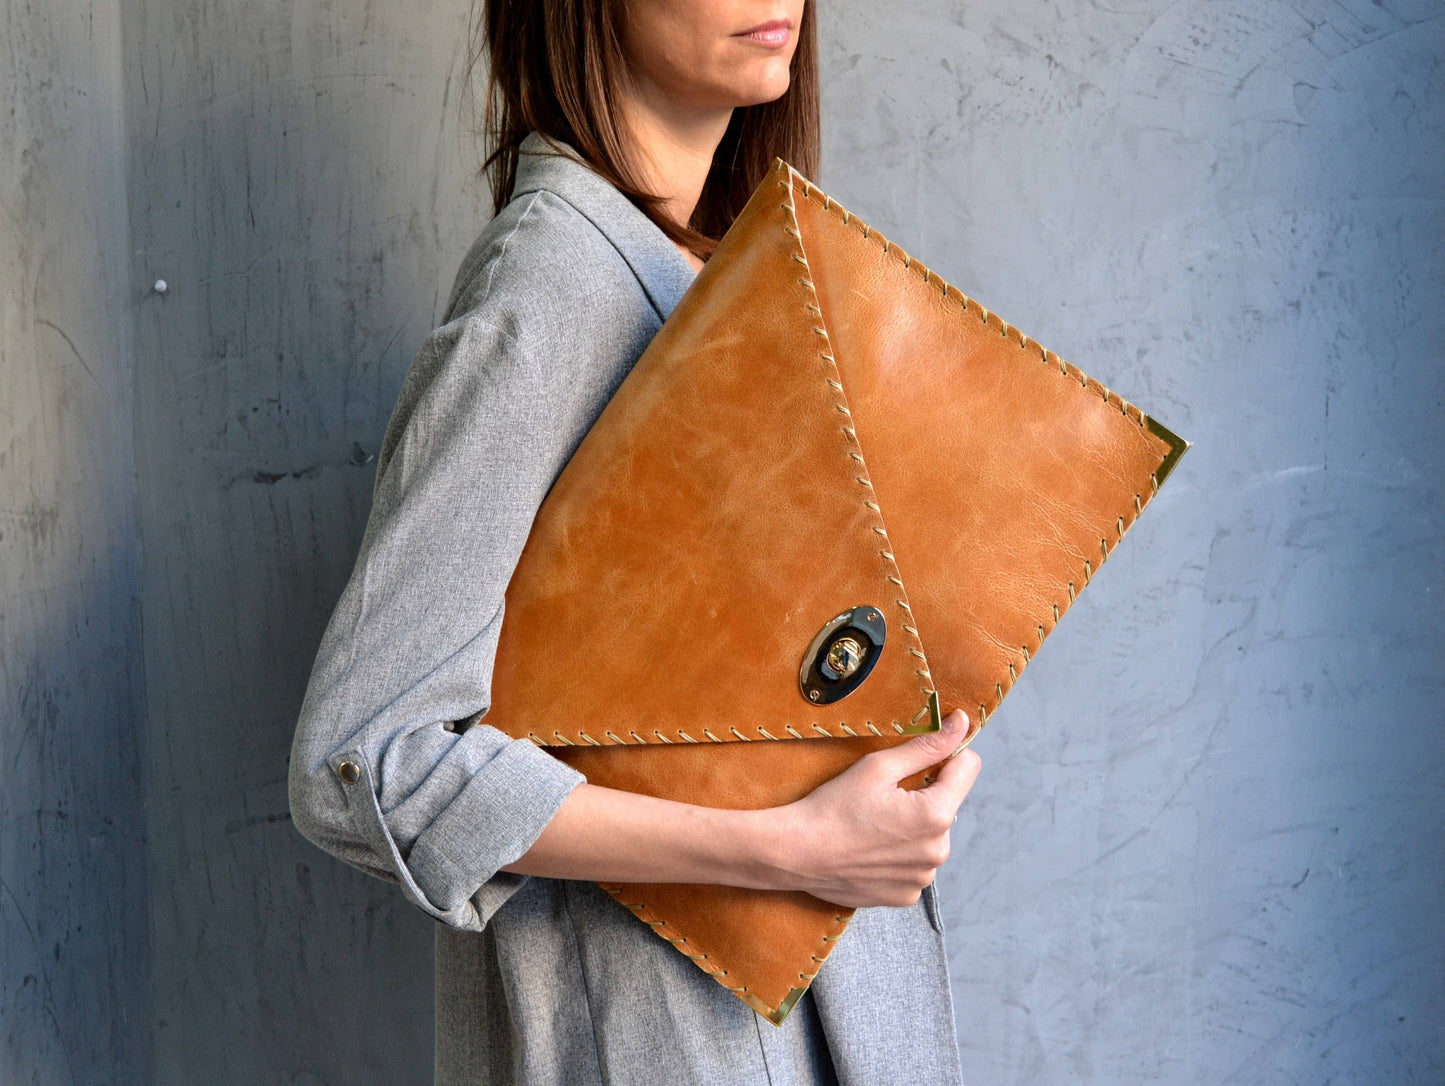 LEATHER CLUTCH CAMEL